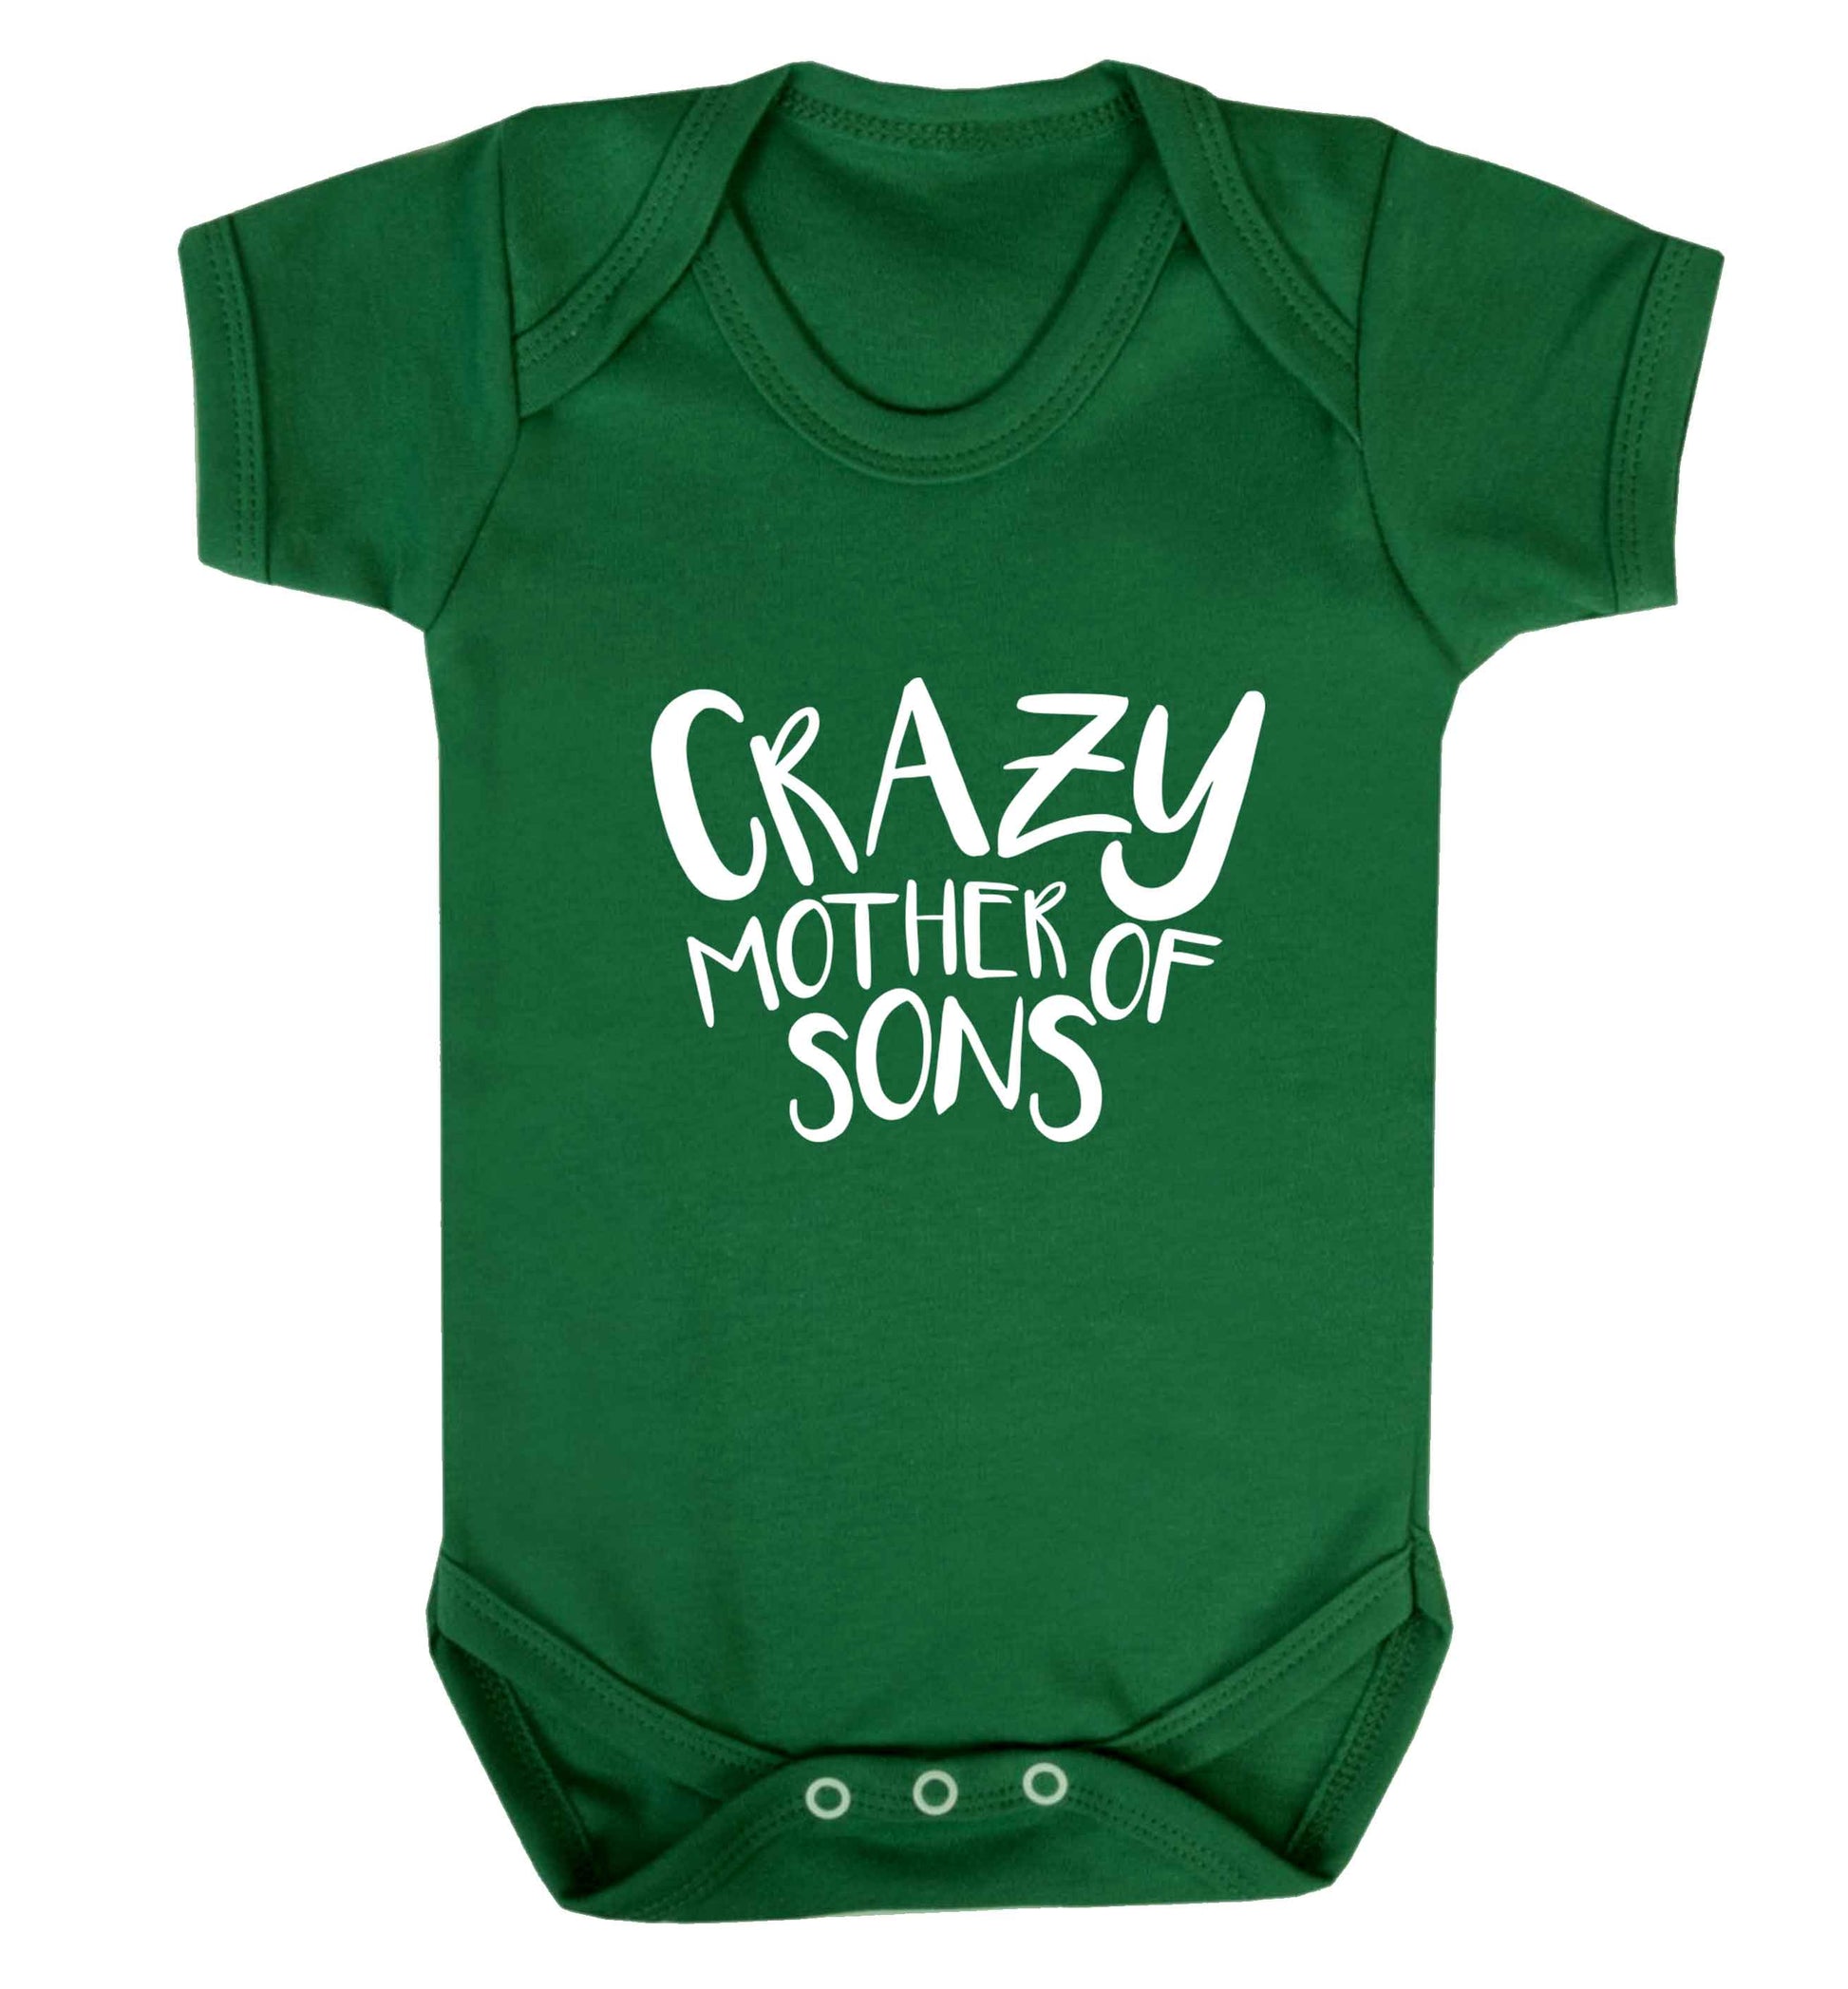 Crazy mother of sons baby vest green 18-24 months